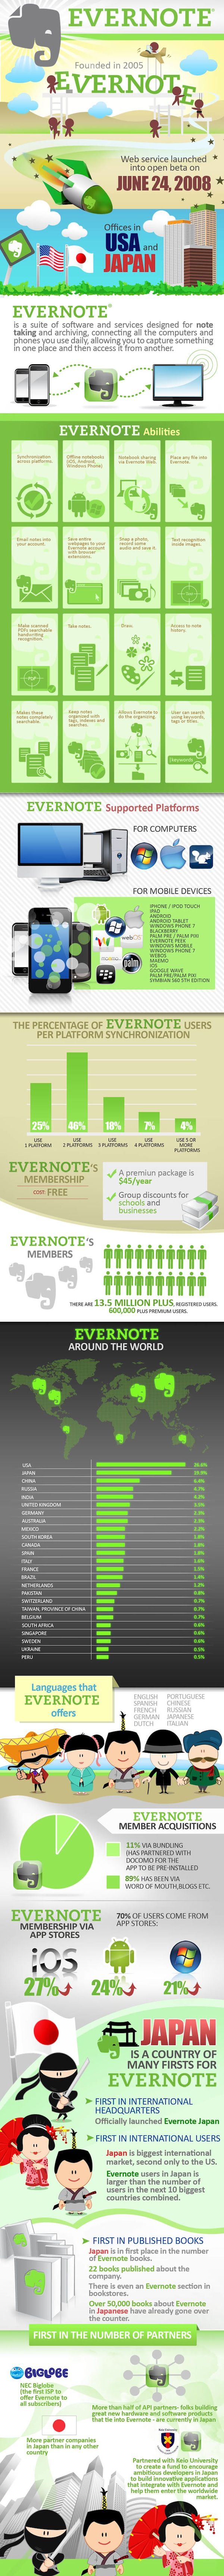 All About Evernote [INFOGRAPHIC]